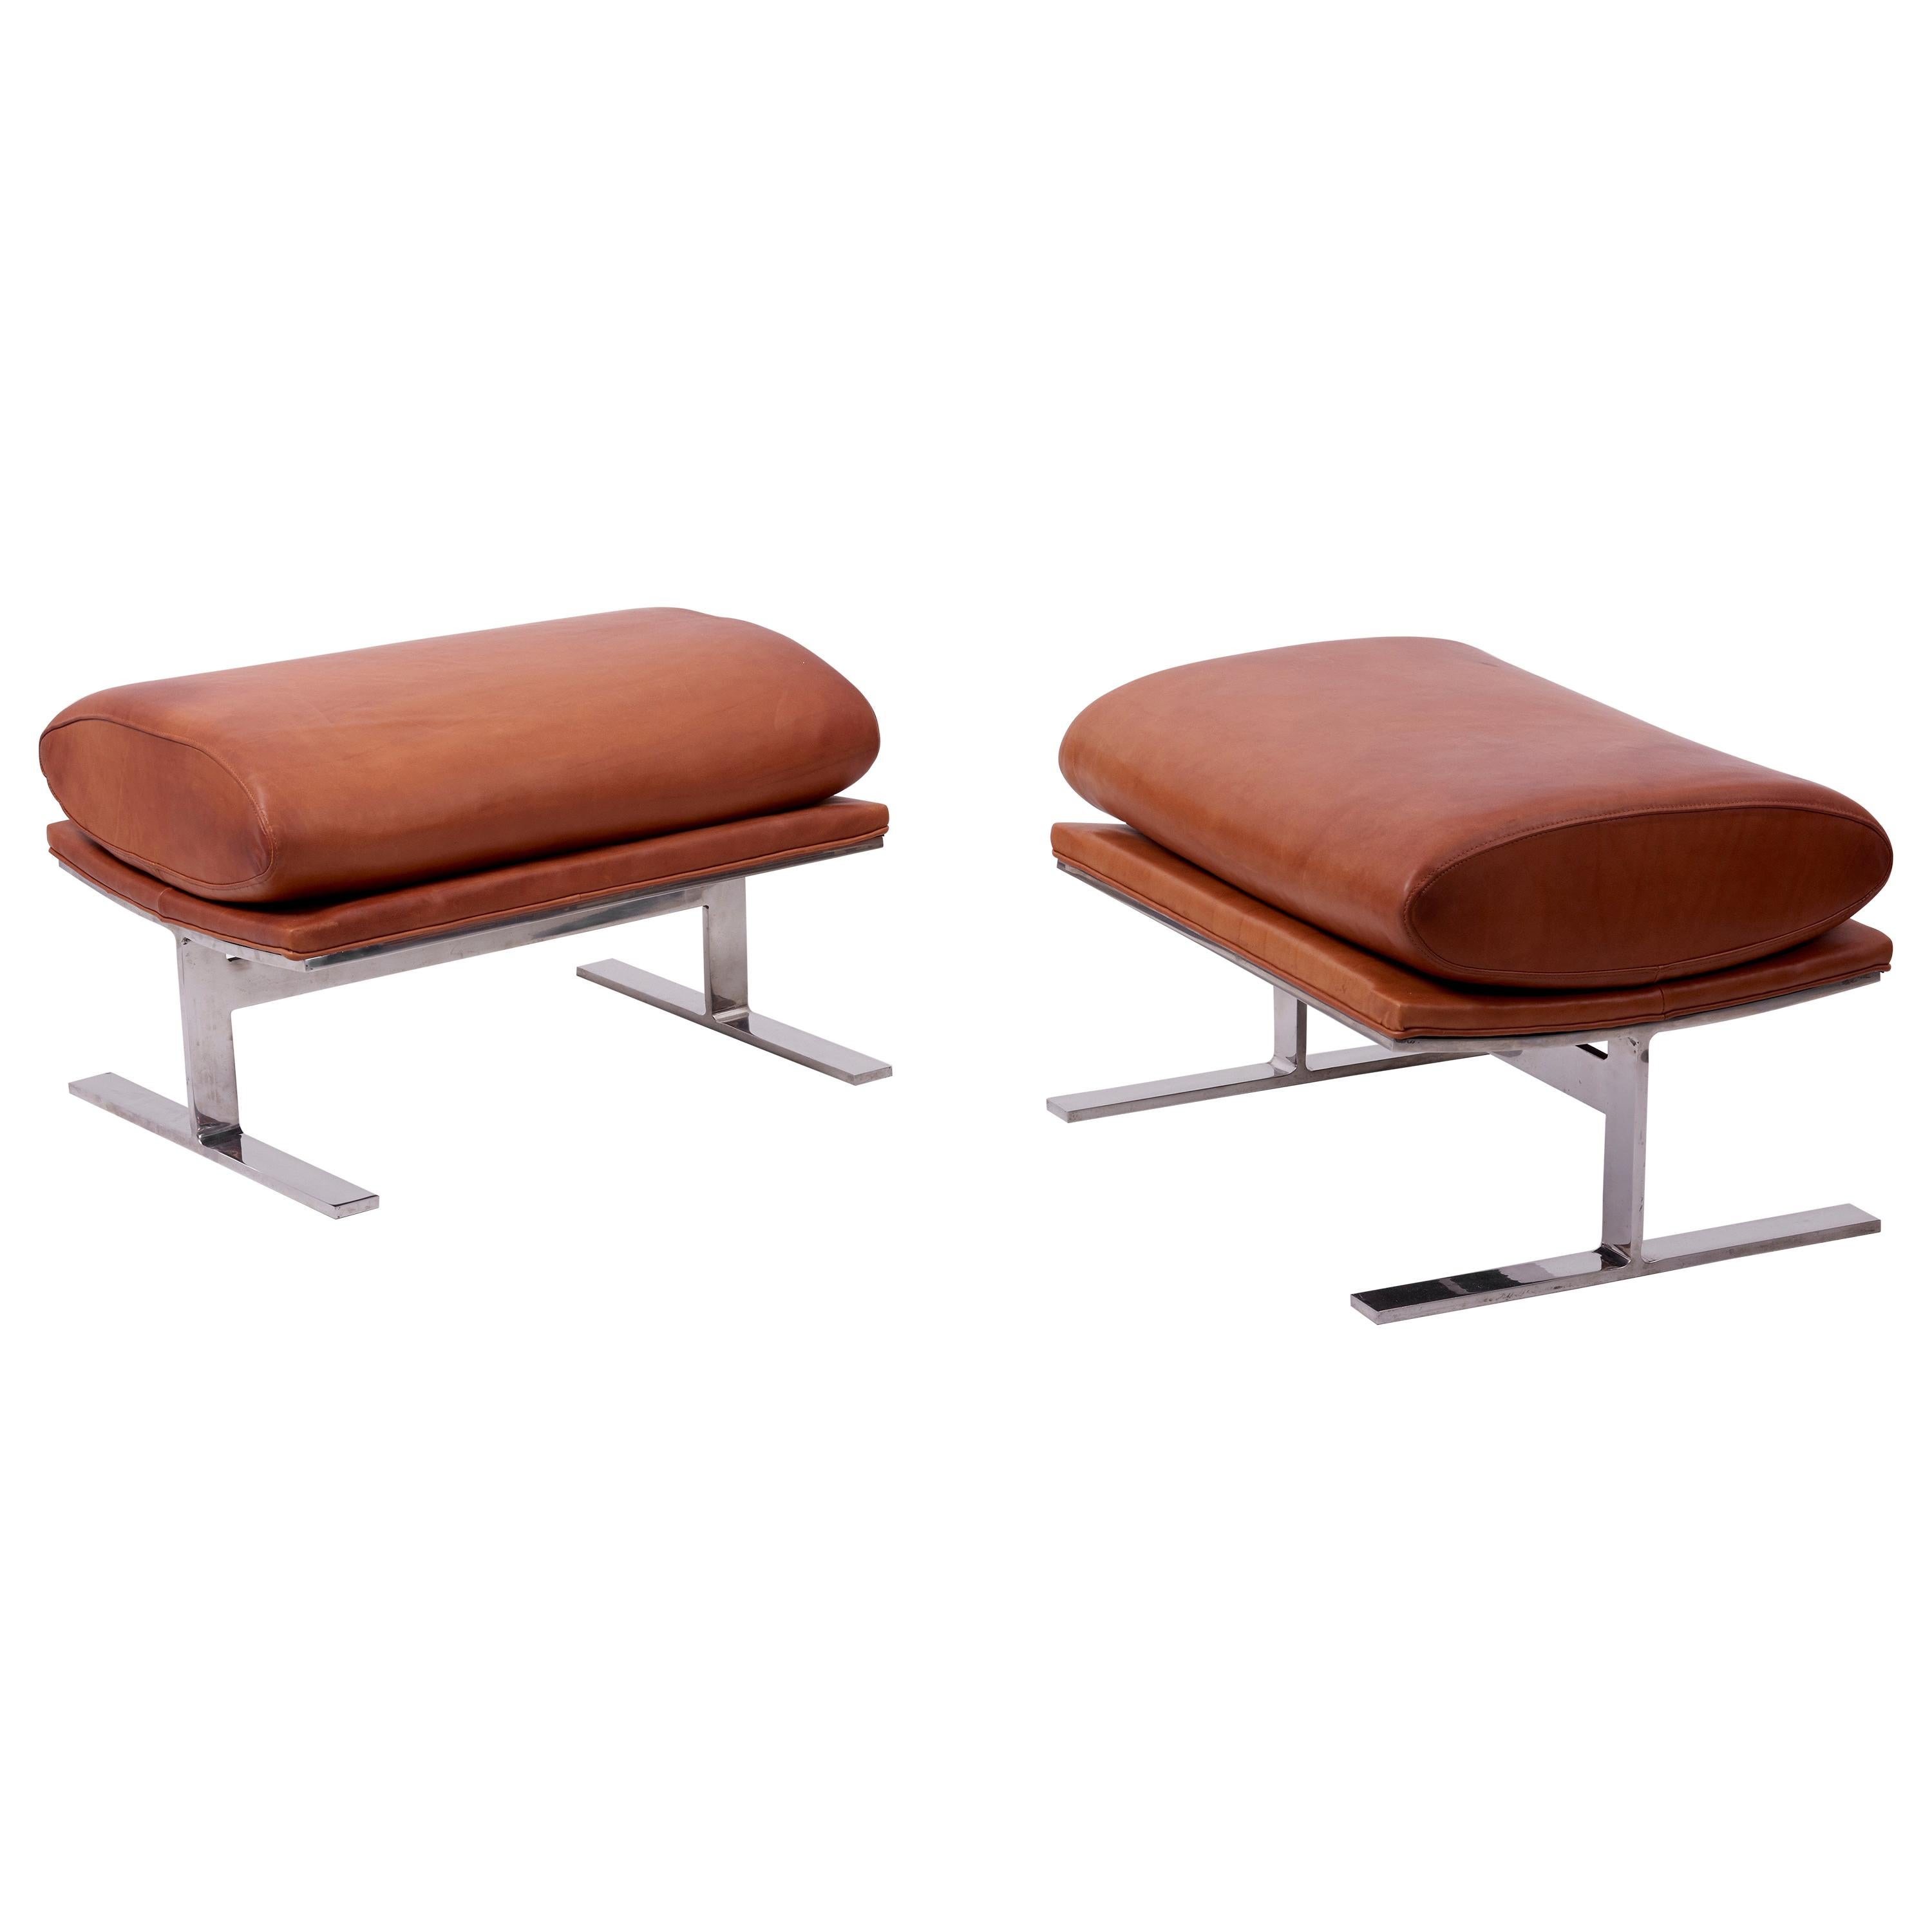 Pair of Arc Stools 'can also be used as a Bench' by Kipp Stewart for Directional